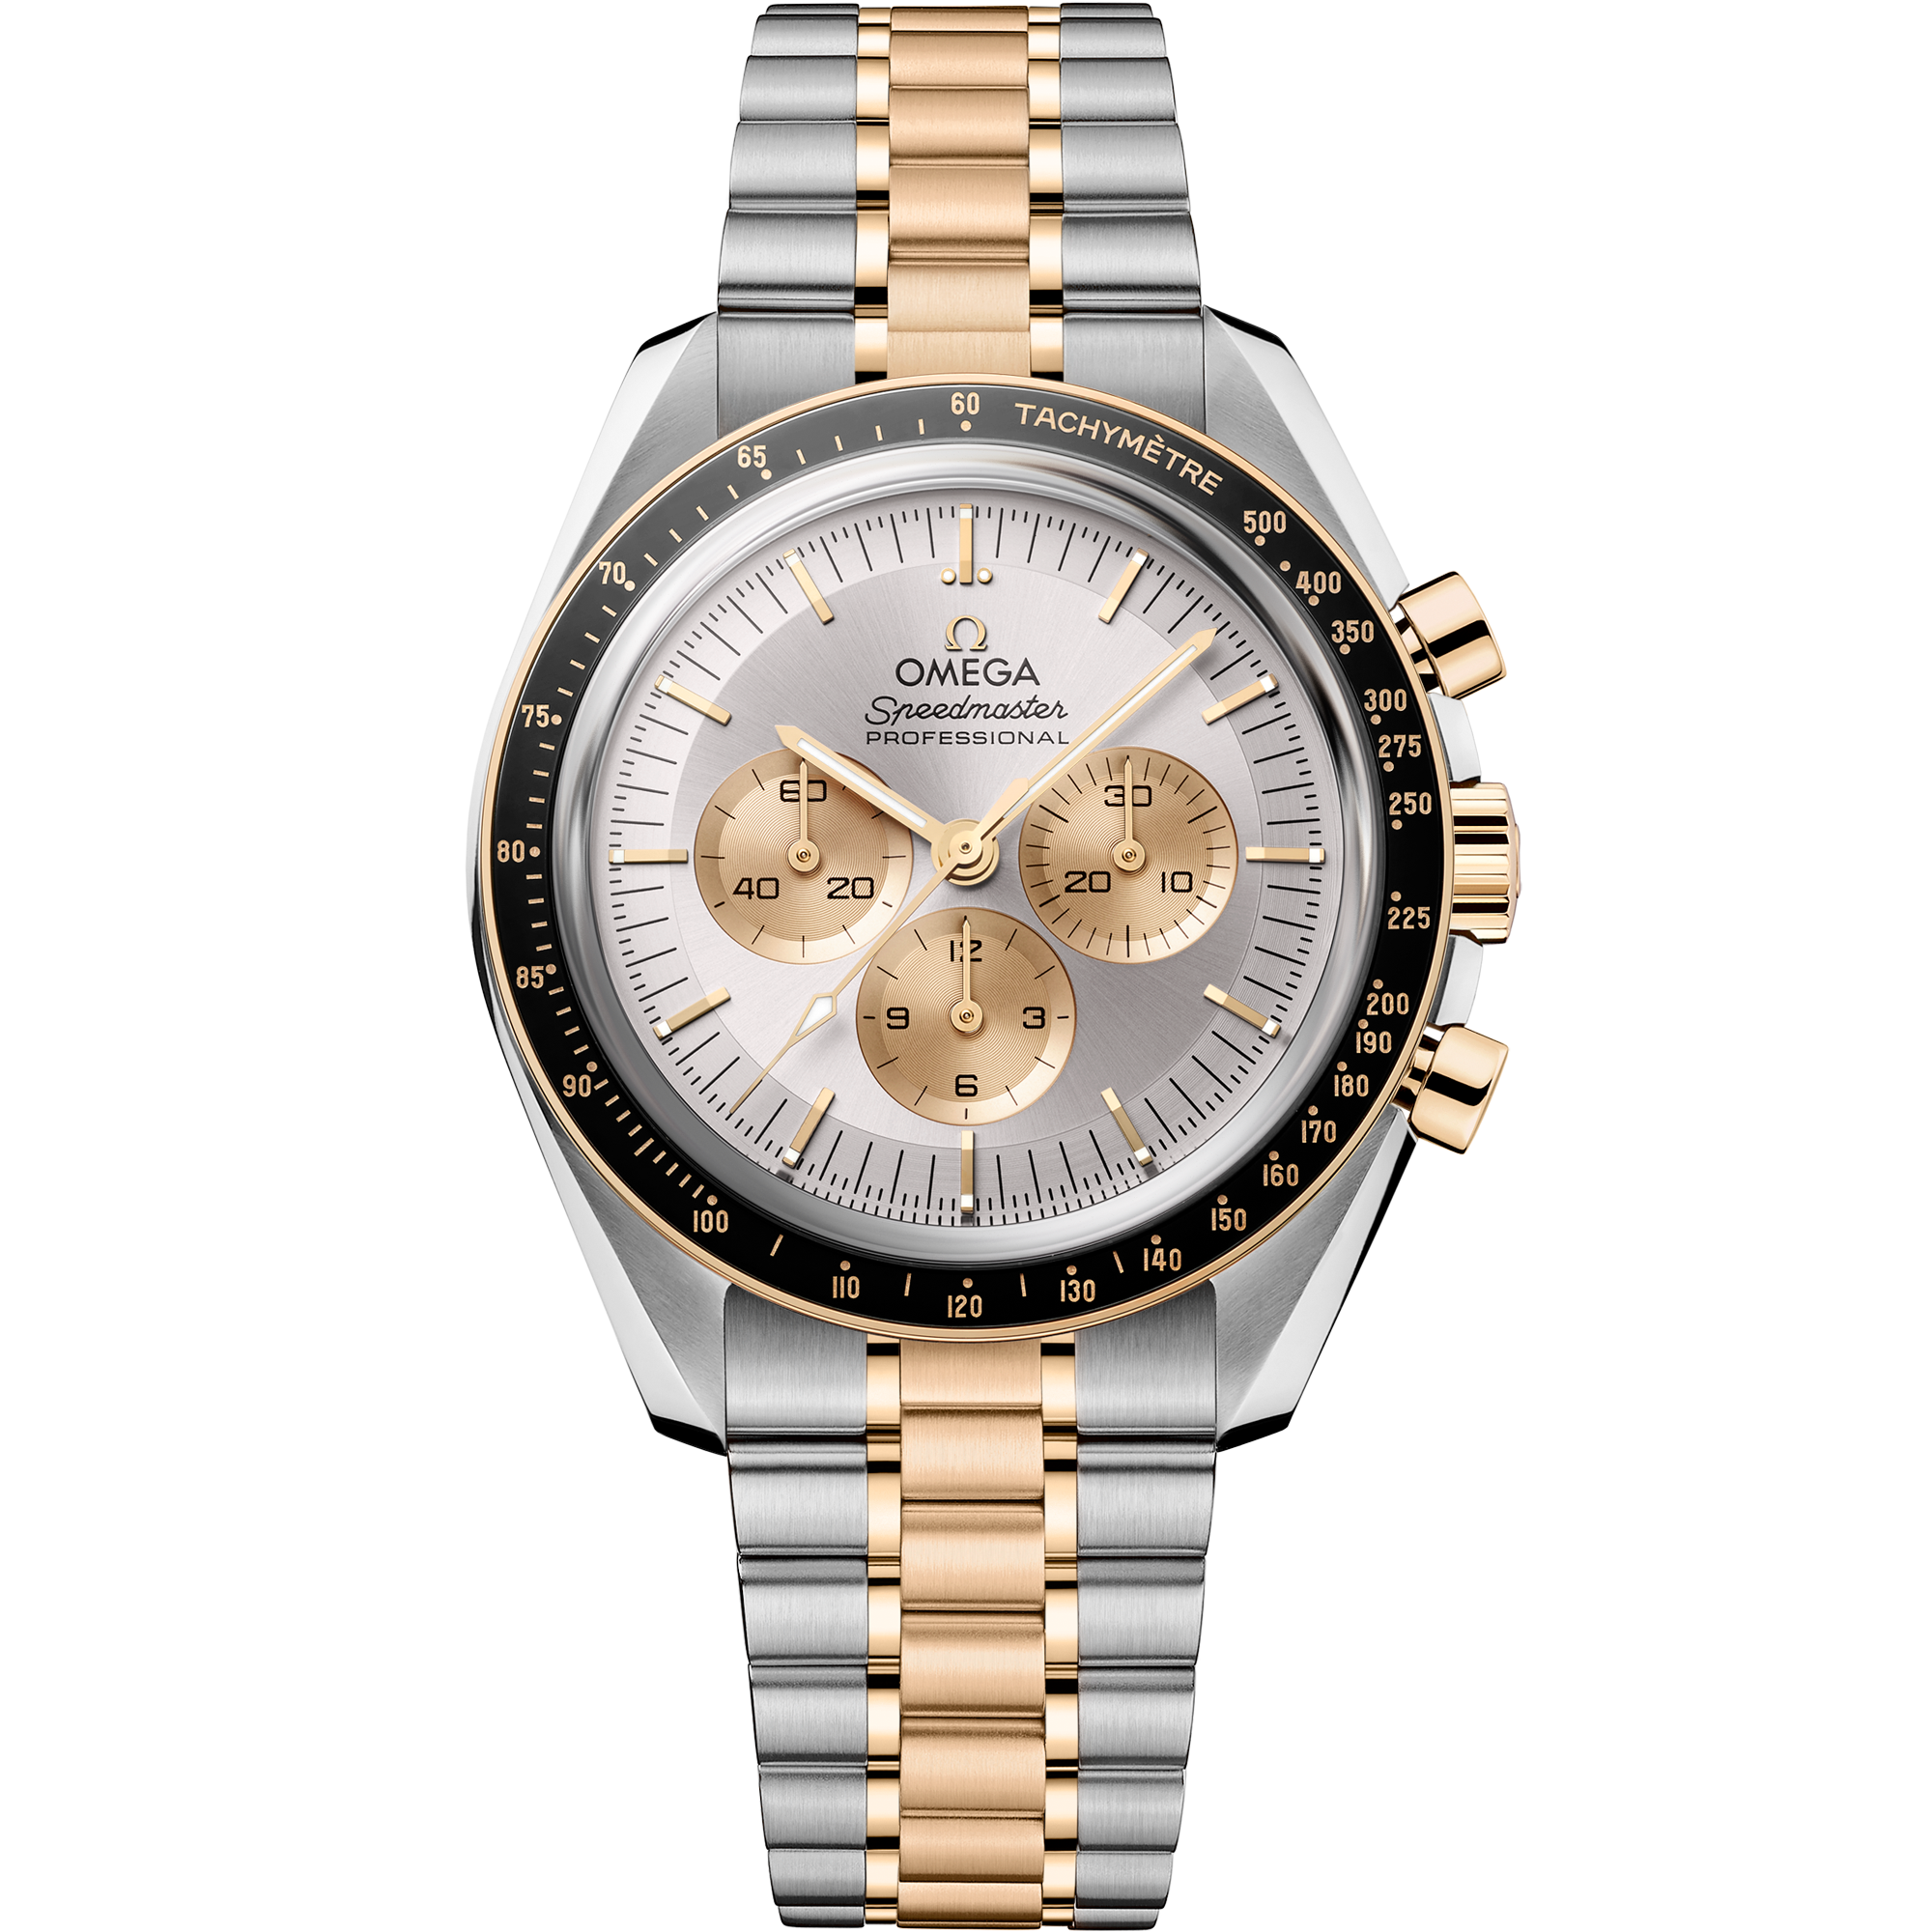 Silver dial watch on steel - Moonshine™ gold case with steel - Moonshine™ gold bracelet - Speedmaster Moonwatch Professional 42 mm, steel - Moonshine™ gold on steel - Moonshine™ gold - 310.20.42.50.02.001